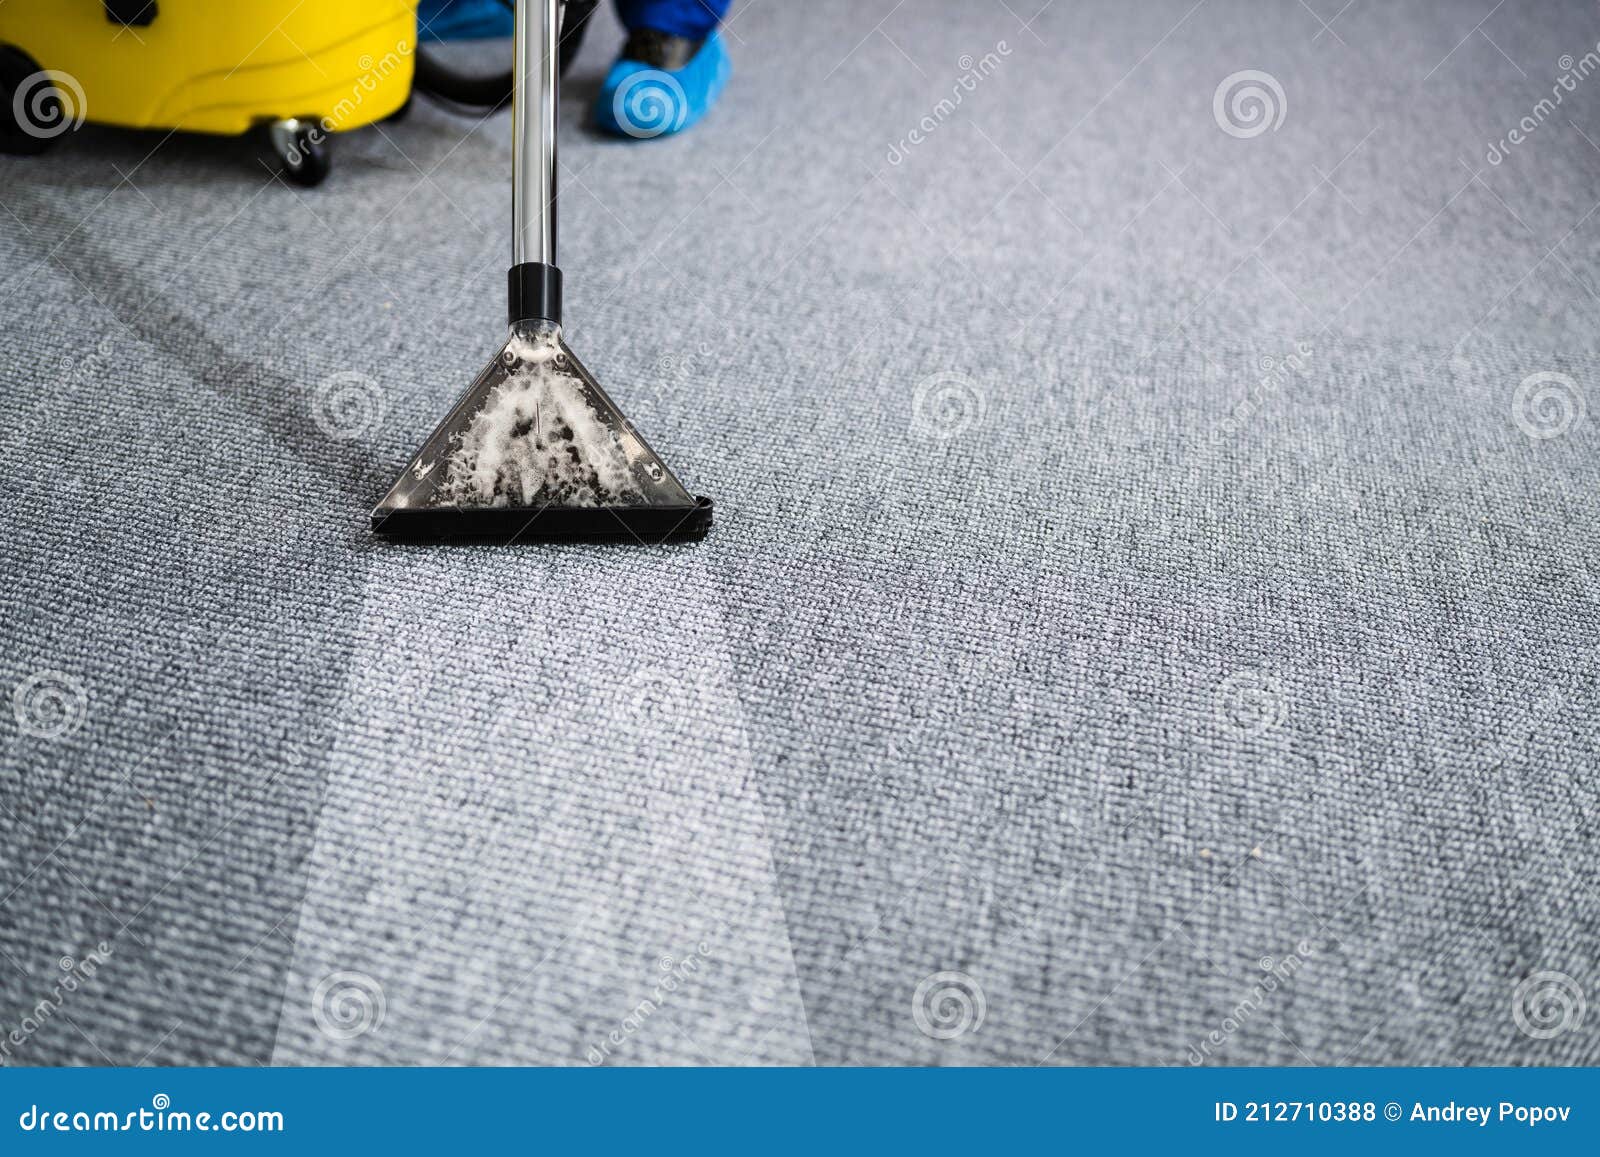 professional carpet cleaning service. vacuum cleaner